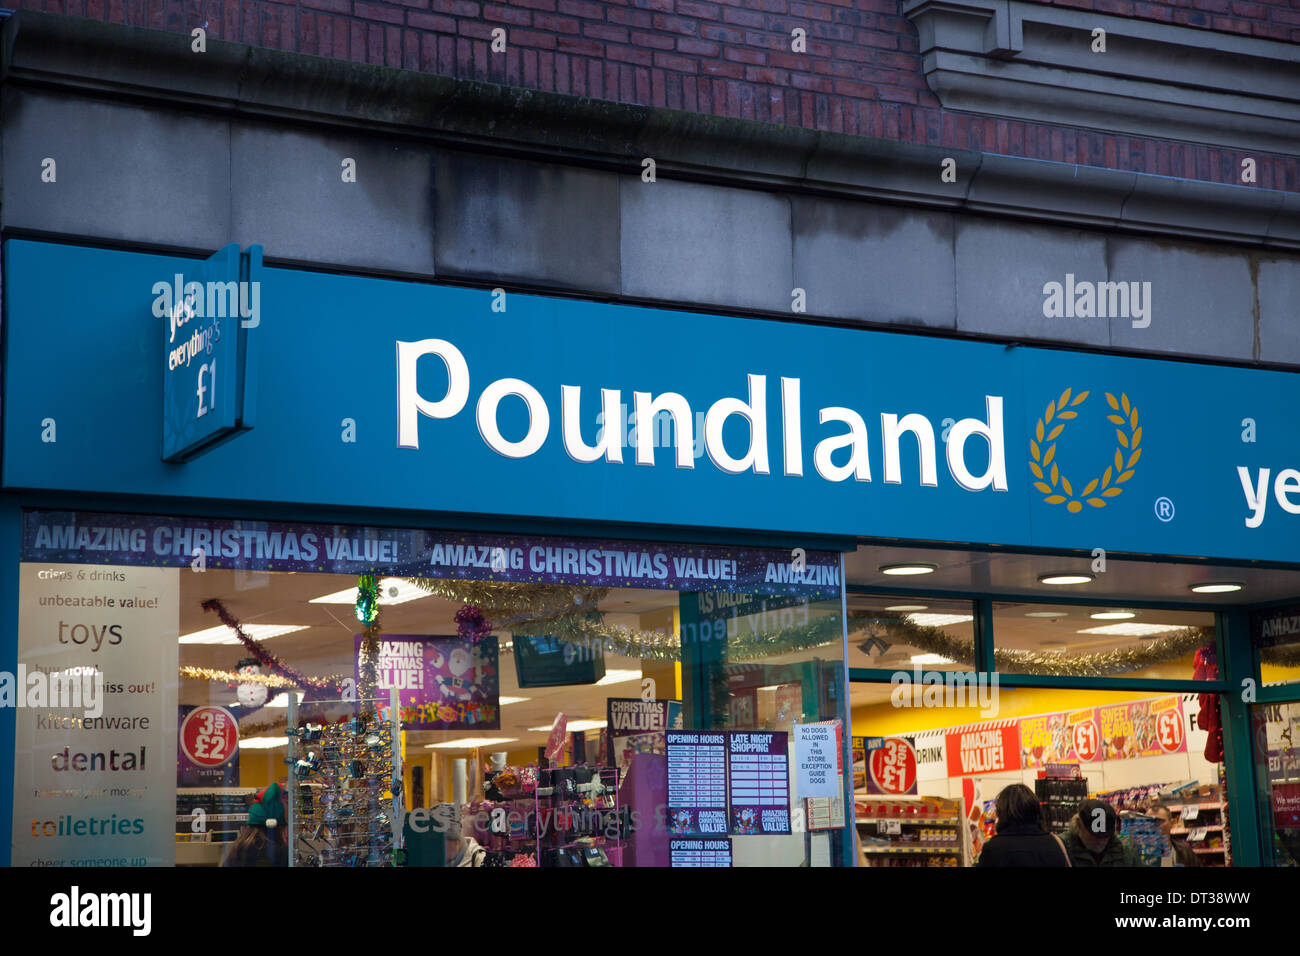 Sign front frontage or facade of a Poundland shop sign Macclesfield Cheshire England UK Stock Photo